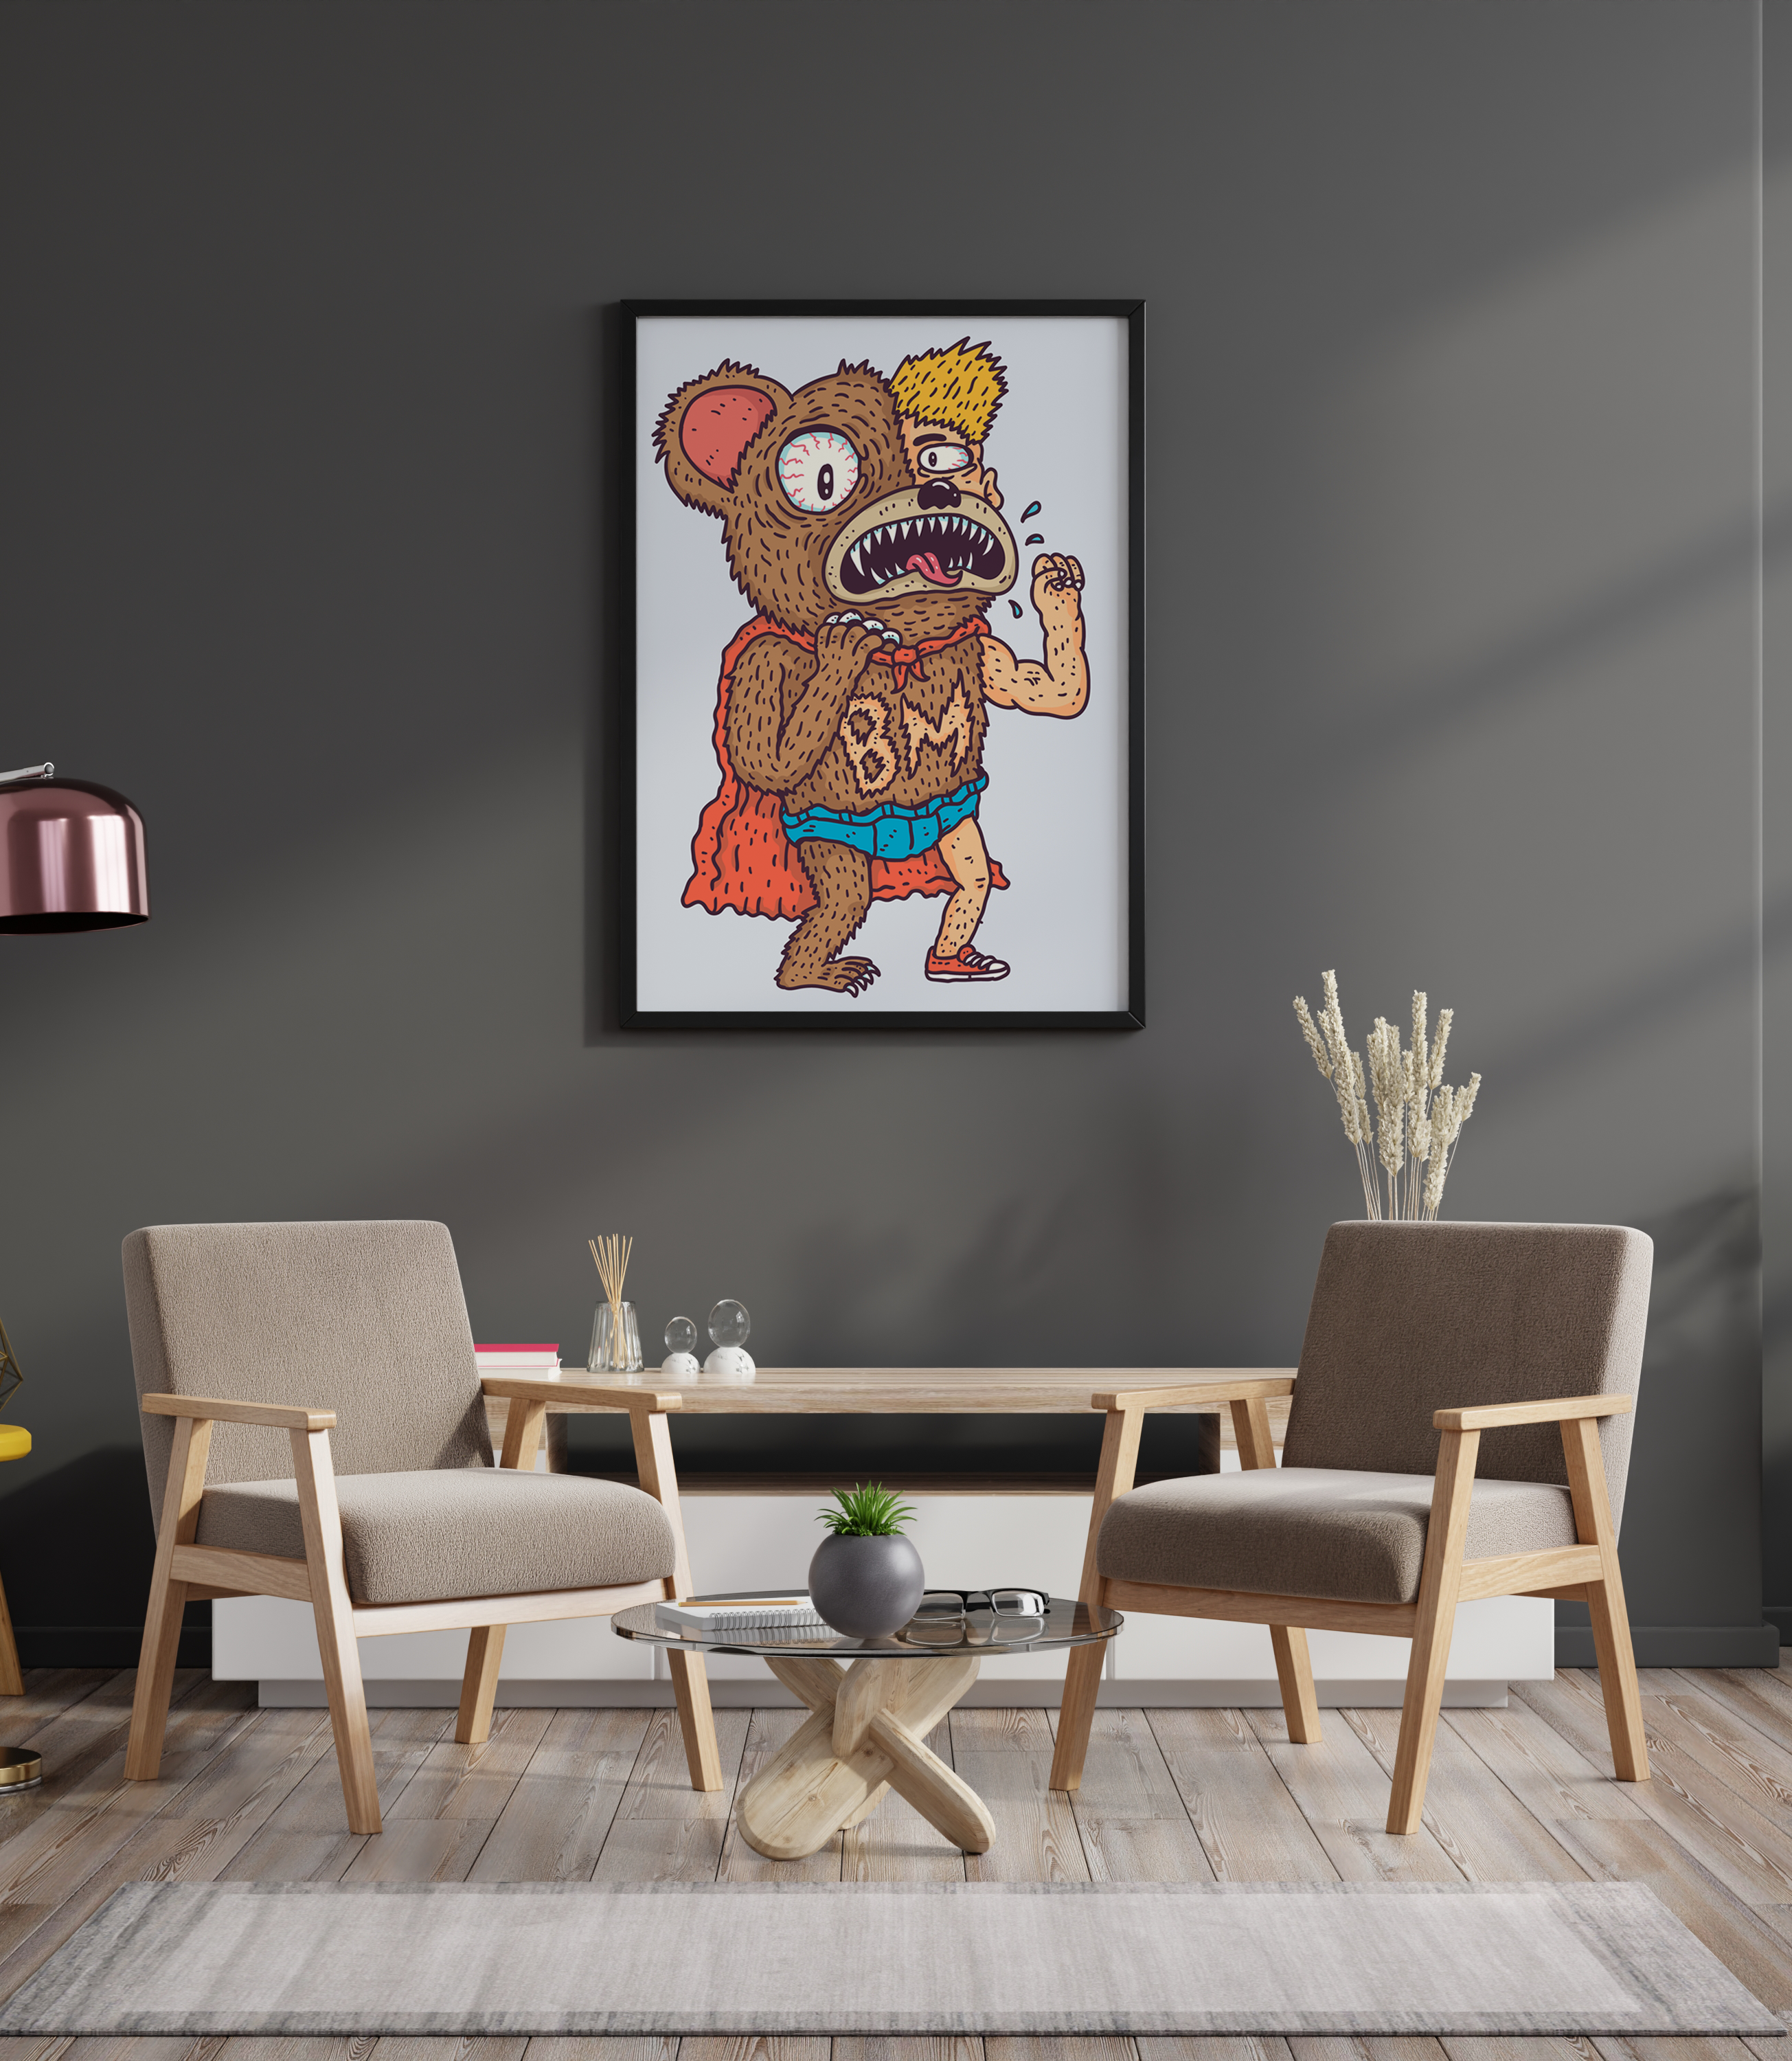 Abstract cartoon style bear infused with man illustration